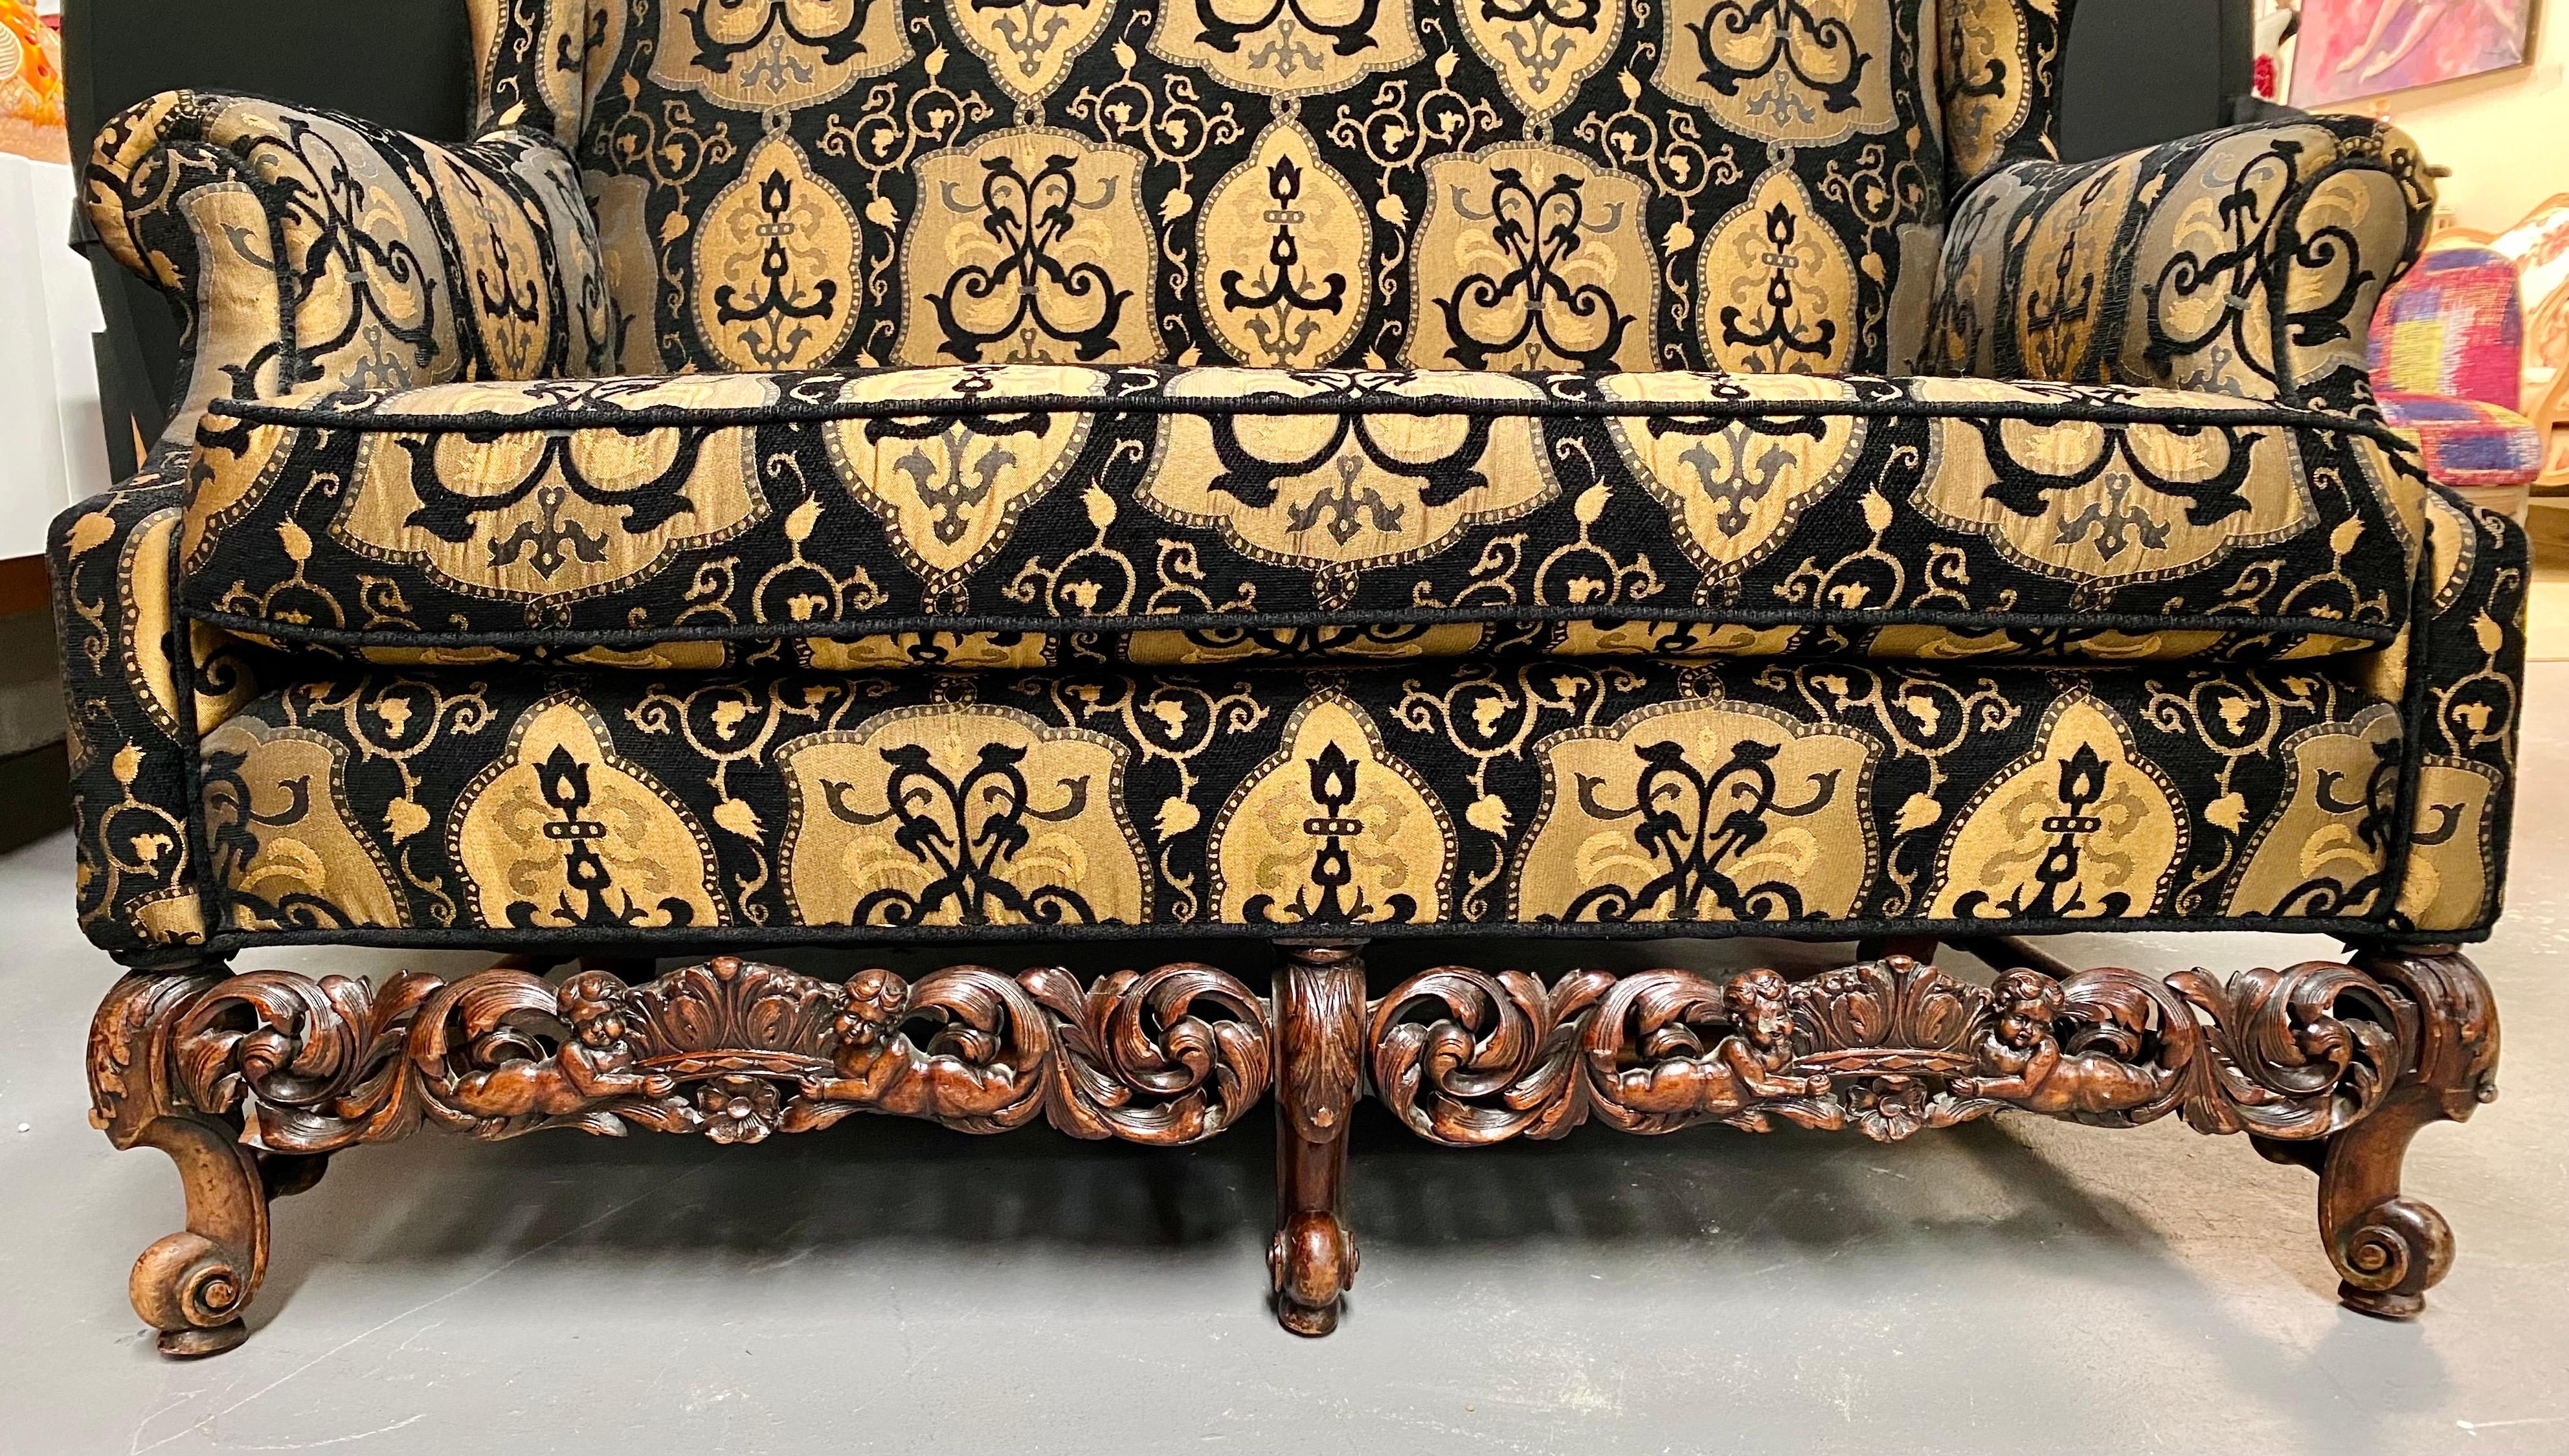 20th Century Italian Rococo Revival Style Settee or Sofa with Heraldic Motif in Black & Beige For Sale